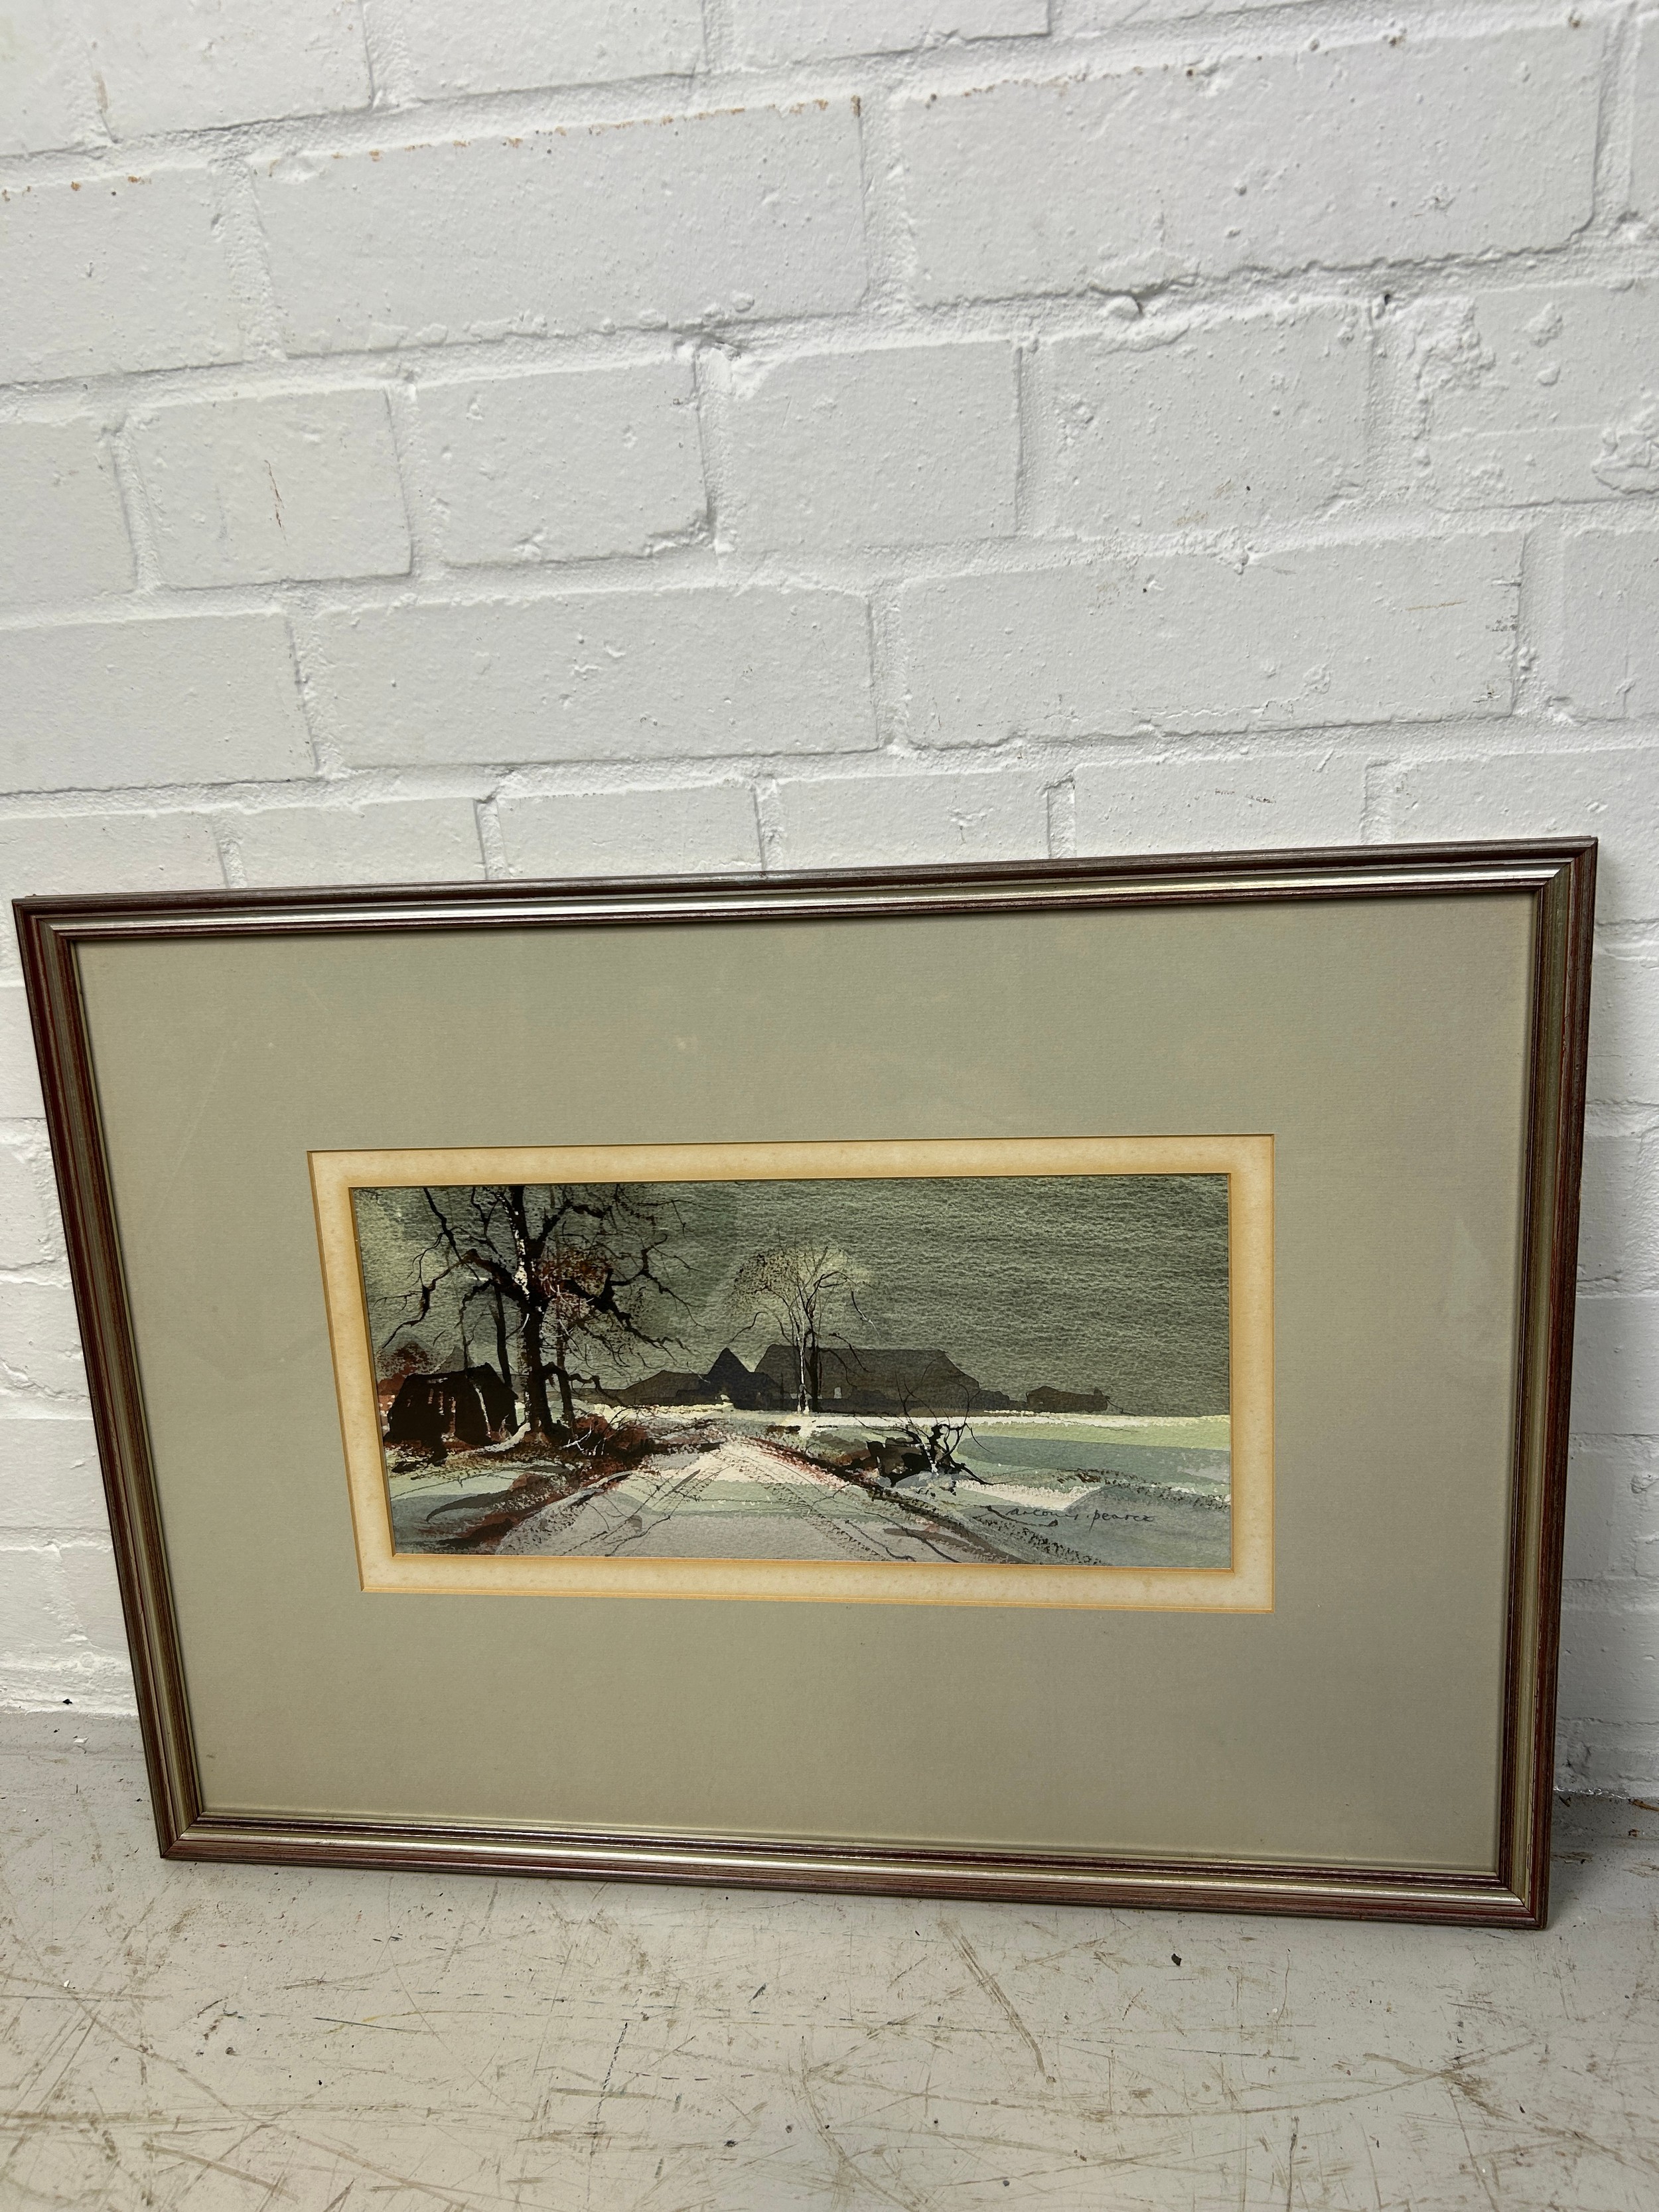 ANTONY PEARCE (B.1933): A WATERCOLOUR PAINTING ON PAPER DEPICTING A WINTRY LANDSCAPE SCENE, - Image 2 of 2